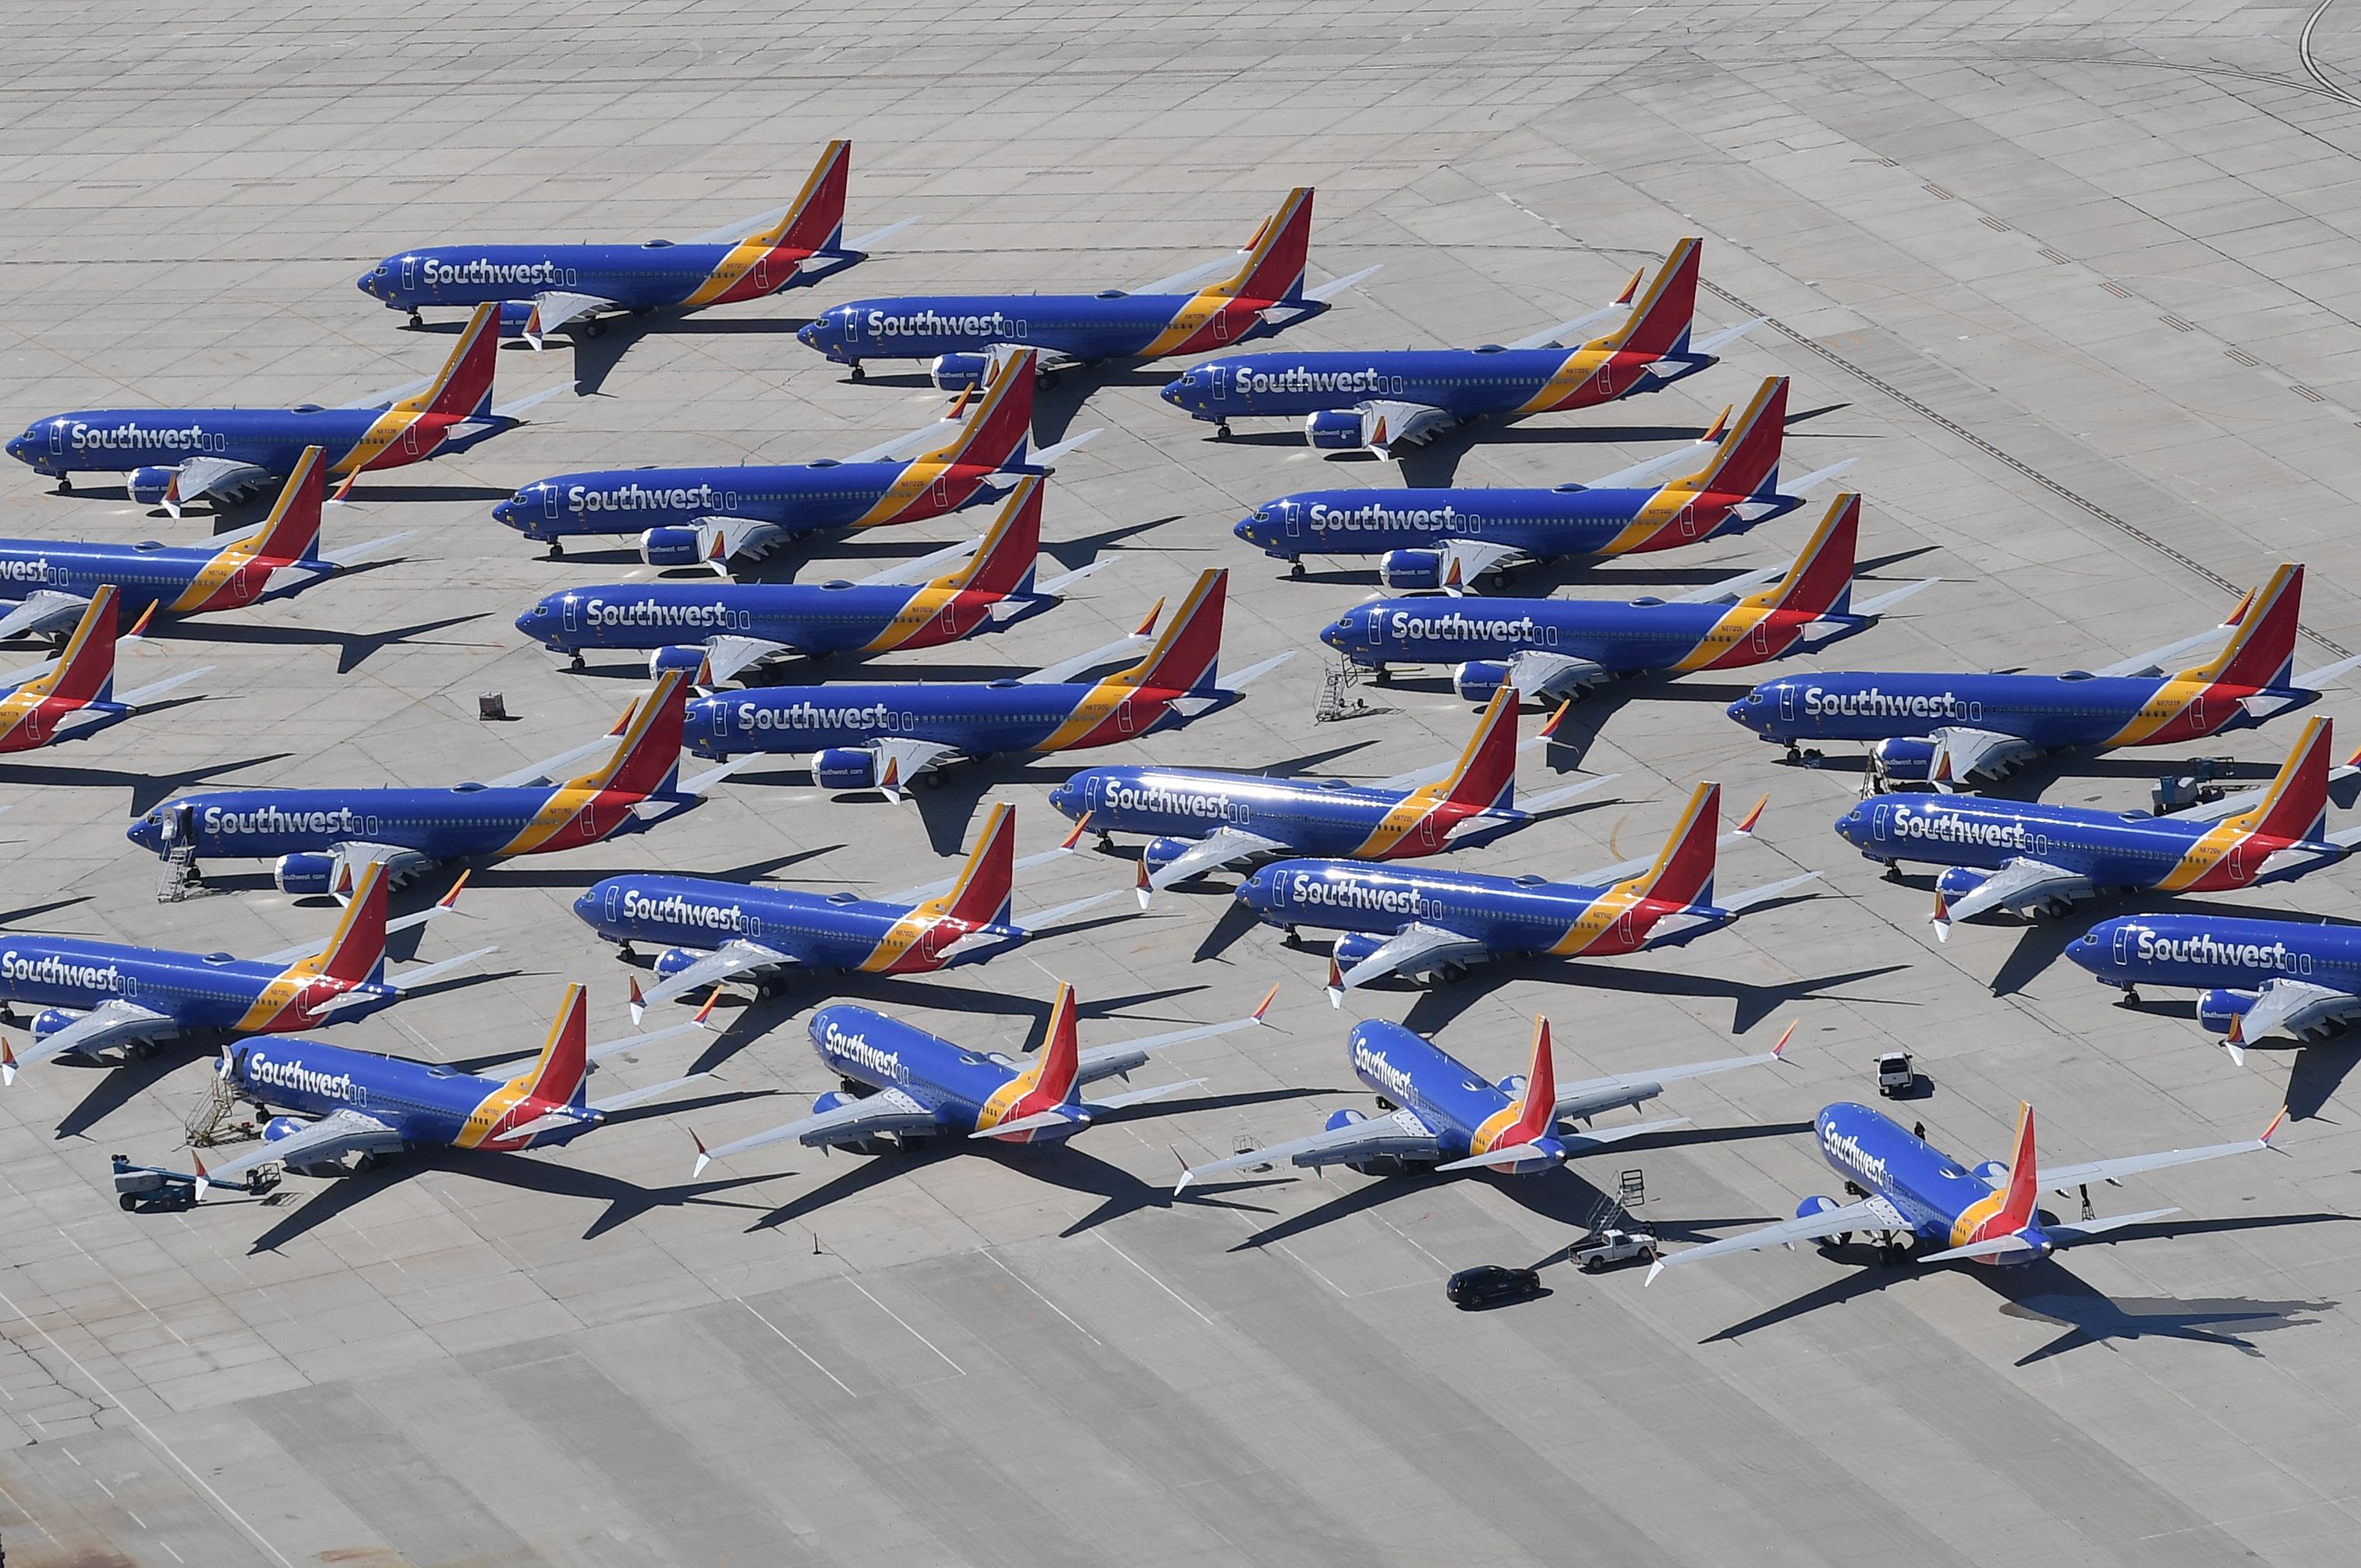 Southwest Airlines Boeing 737 MAX aircraft are parked on the tarmac after being grounded at the Southern California Logistics Airport in Victorville, California on March 28, 2019. (MARK RALSTON/AFP/Getty Images)